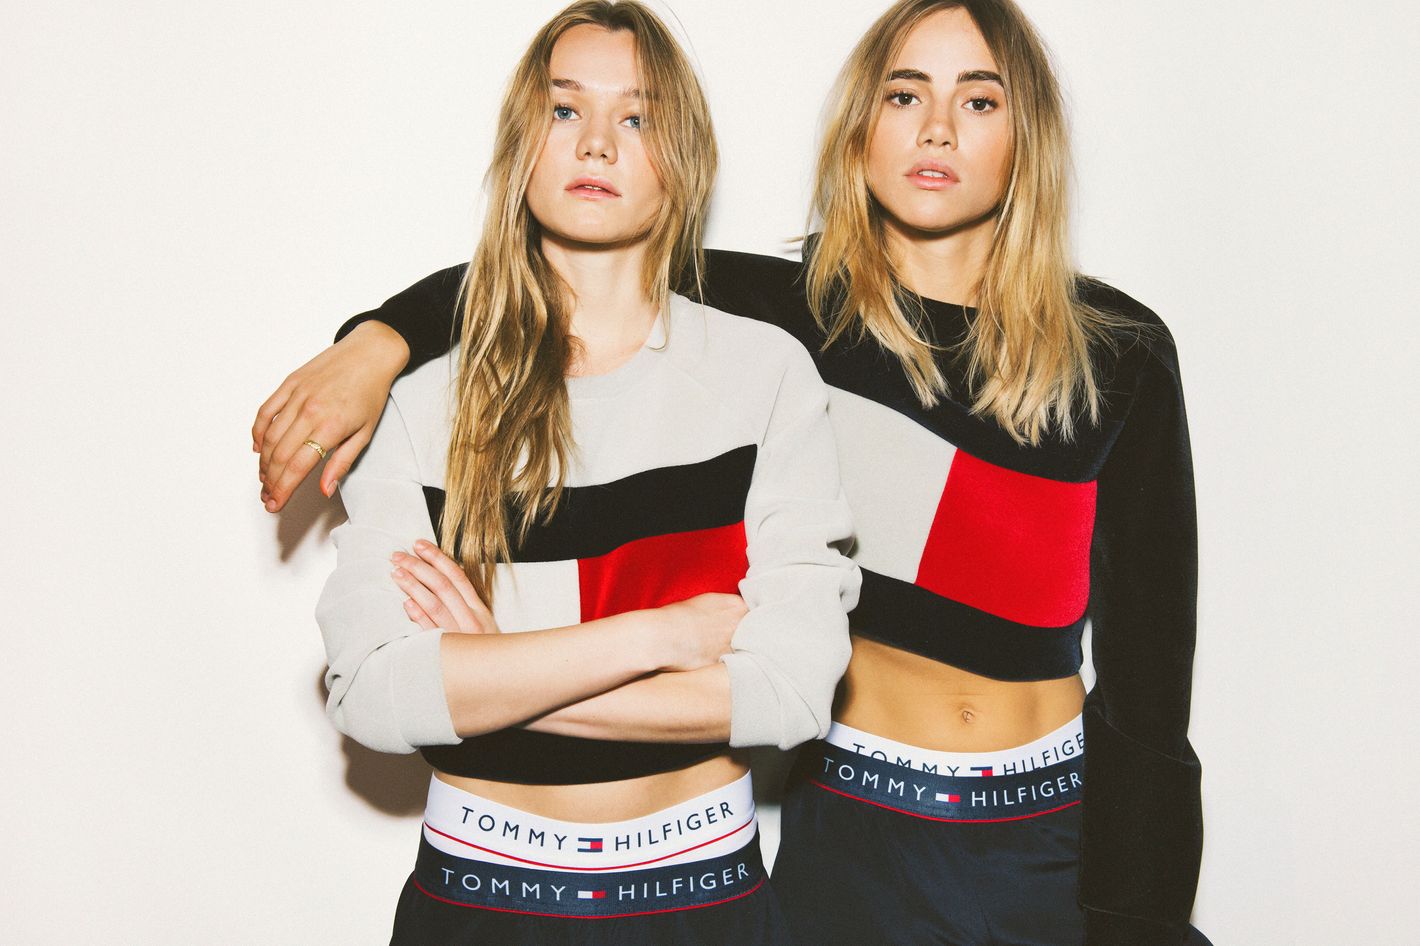 Now You Can Buy the Best of Tommy Hilfiger